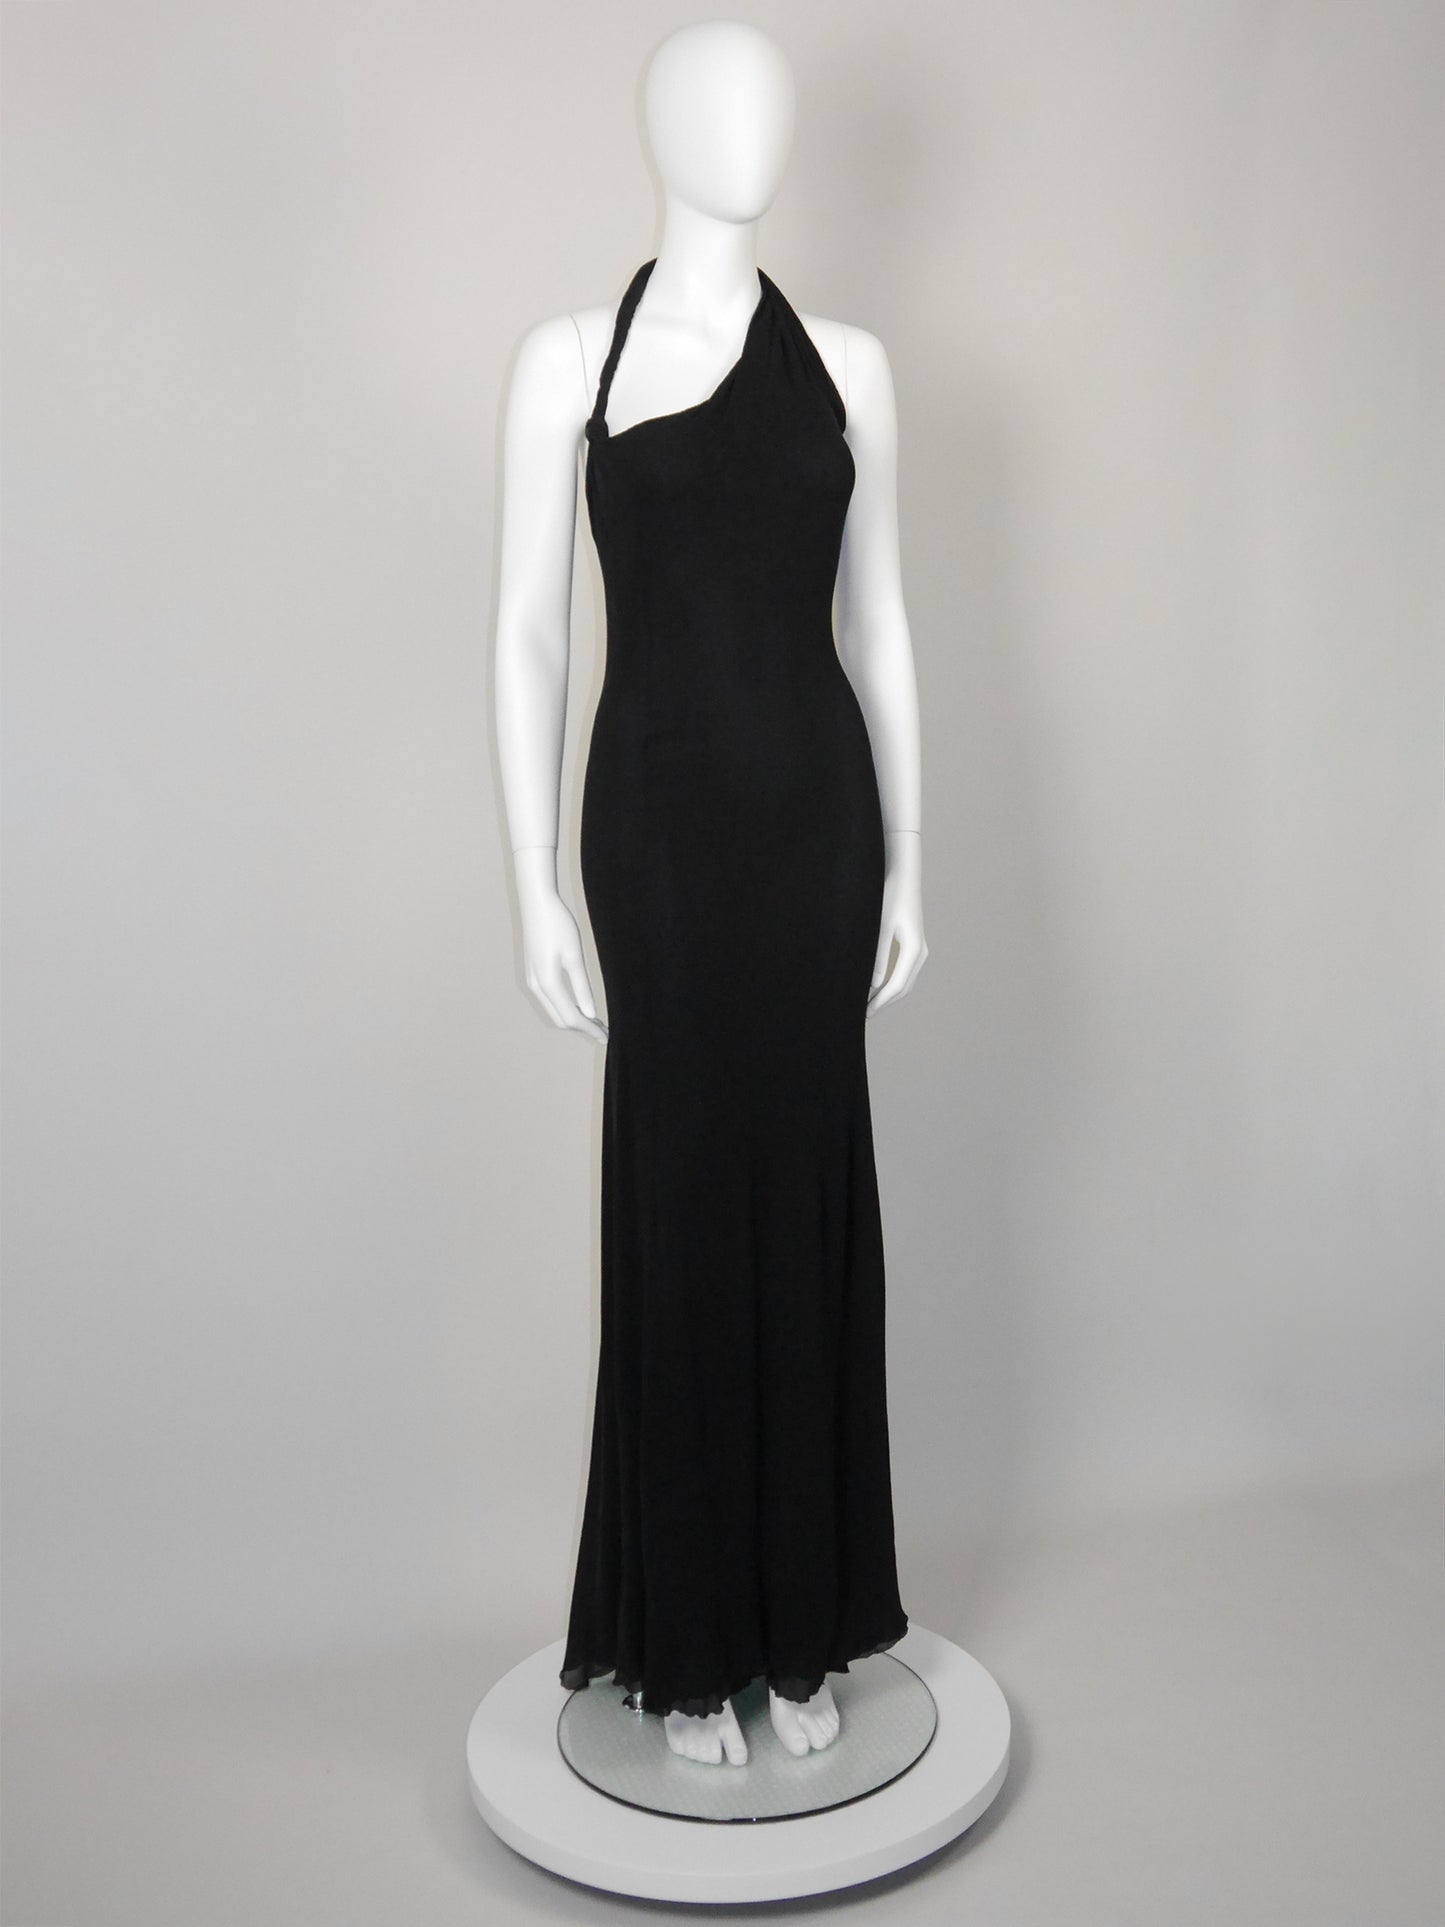 GIANNI VERSACE Couture 1990s 2000s Vintage Silk Maxi Evening Gown w/ High Back Slit Size S